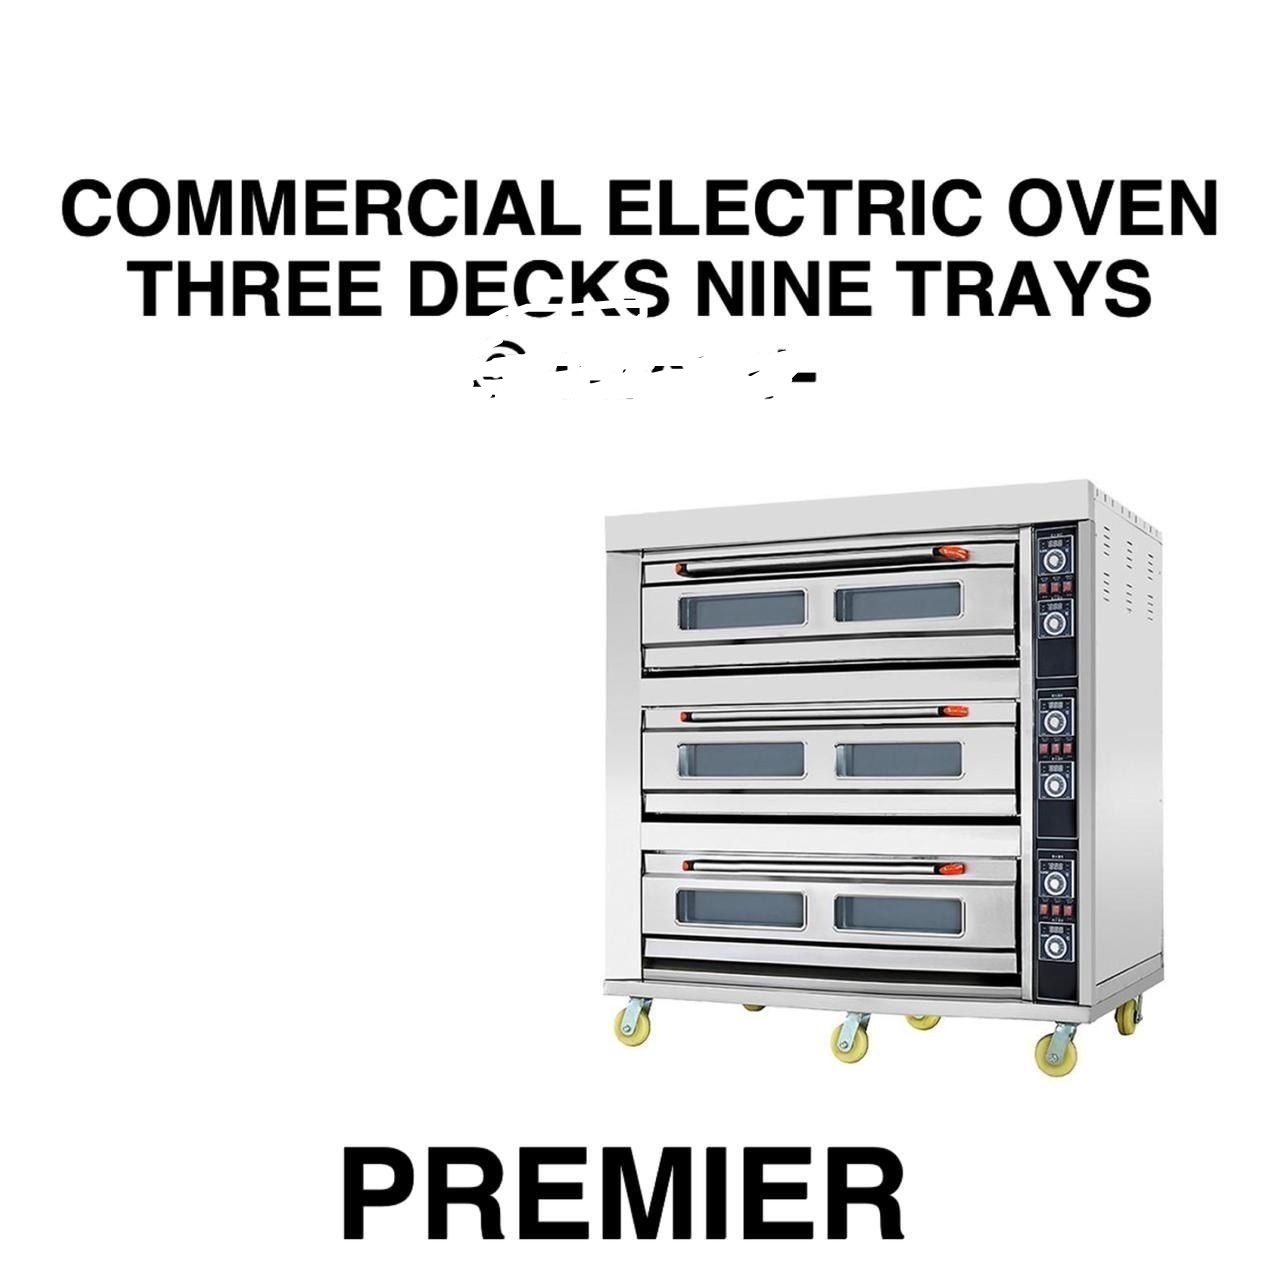 Premier Three Desk Nine Tray commercial electric oven